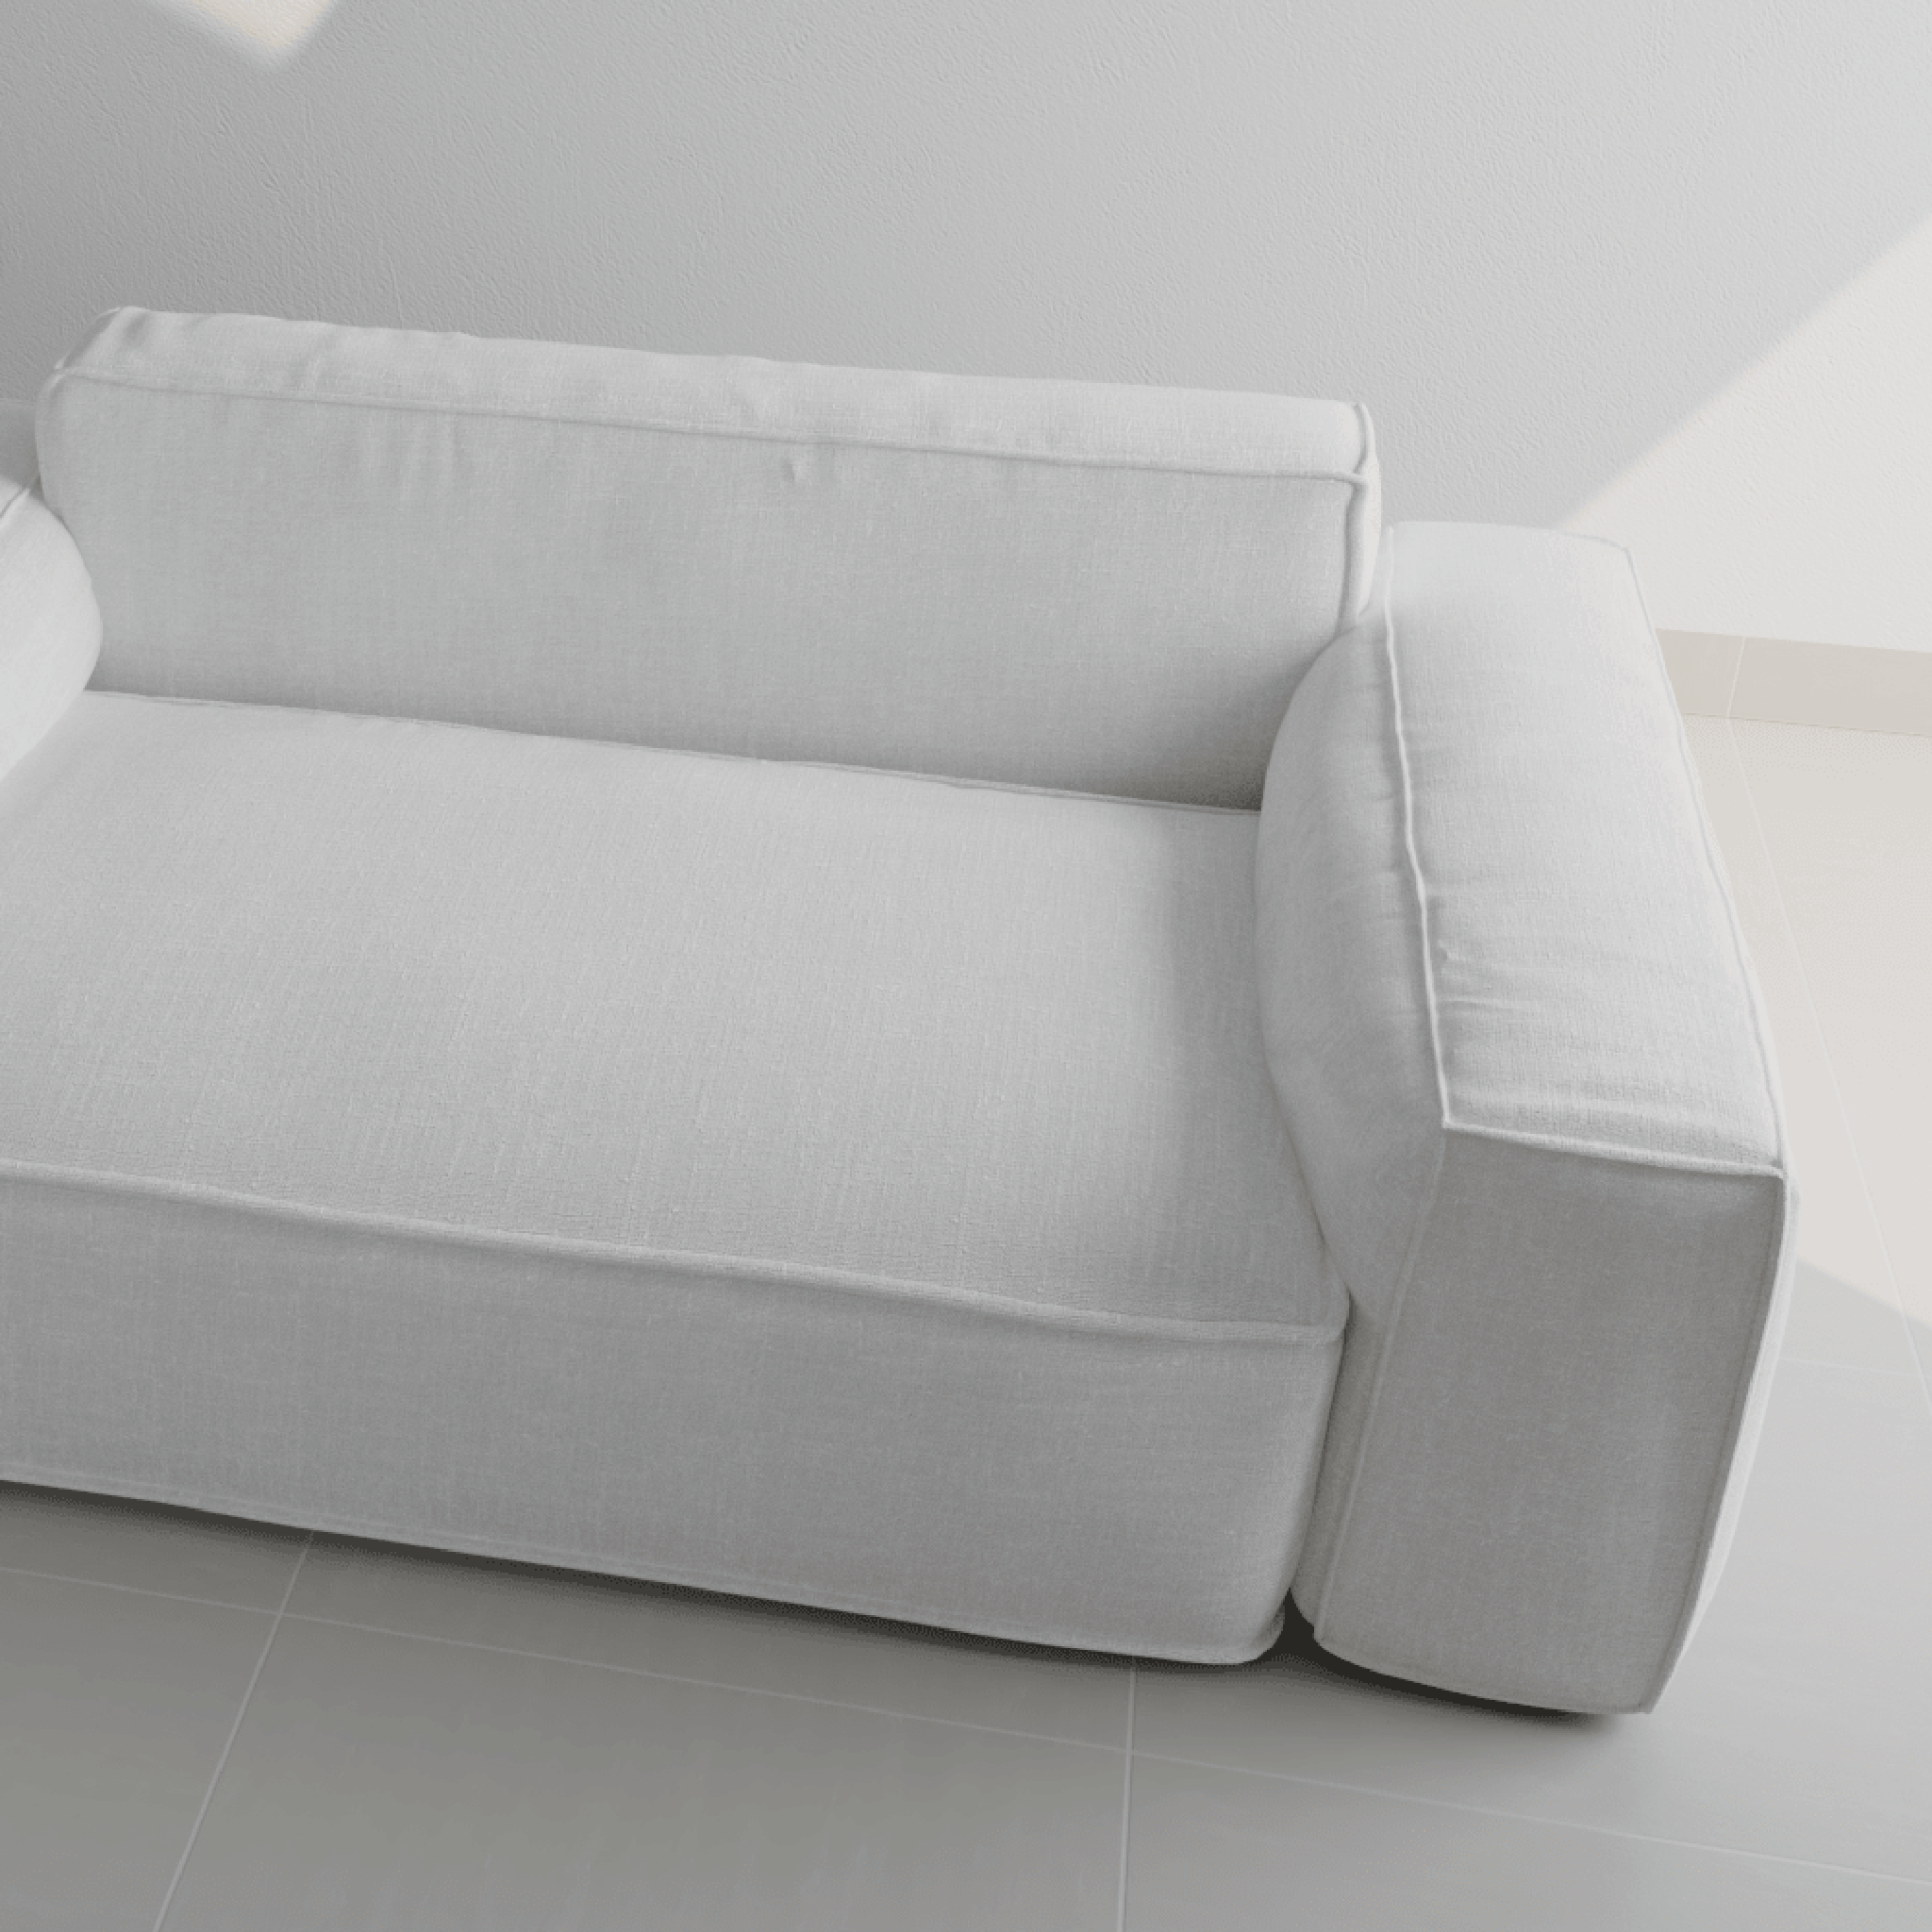 White two-seater sofa with clean lines on a GRAY background.